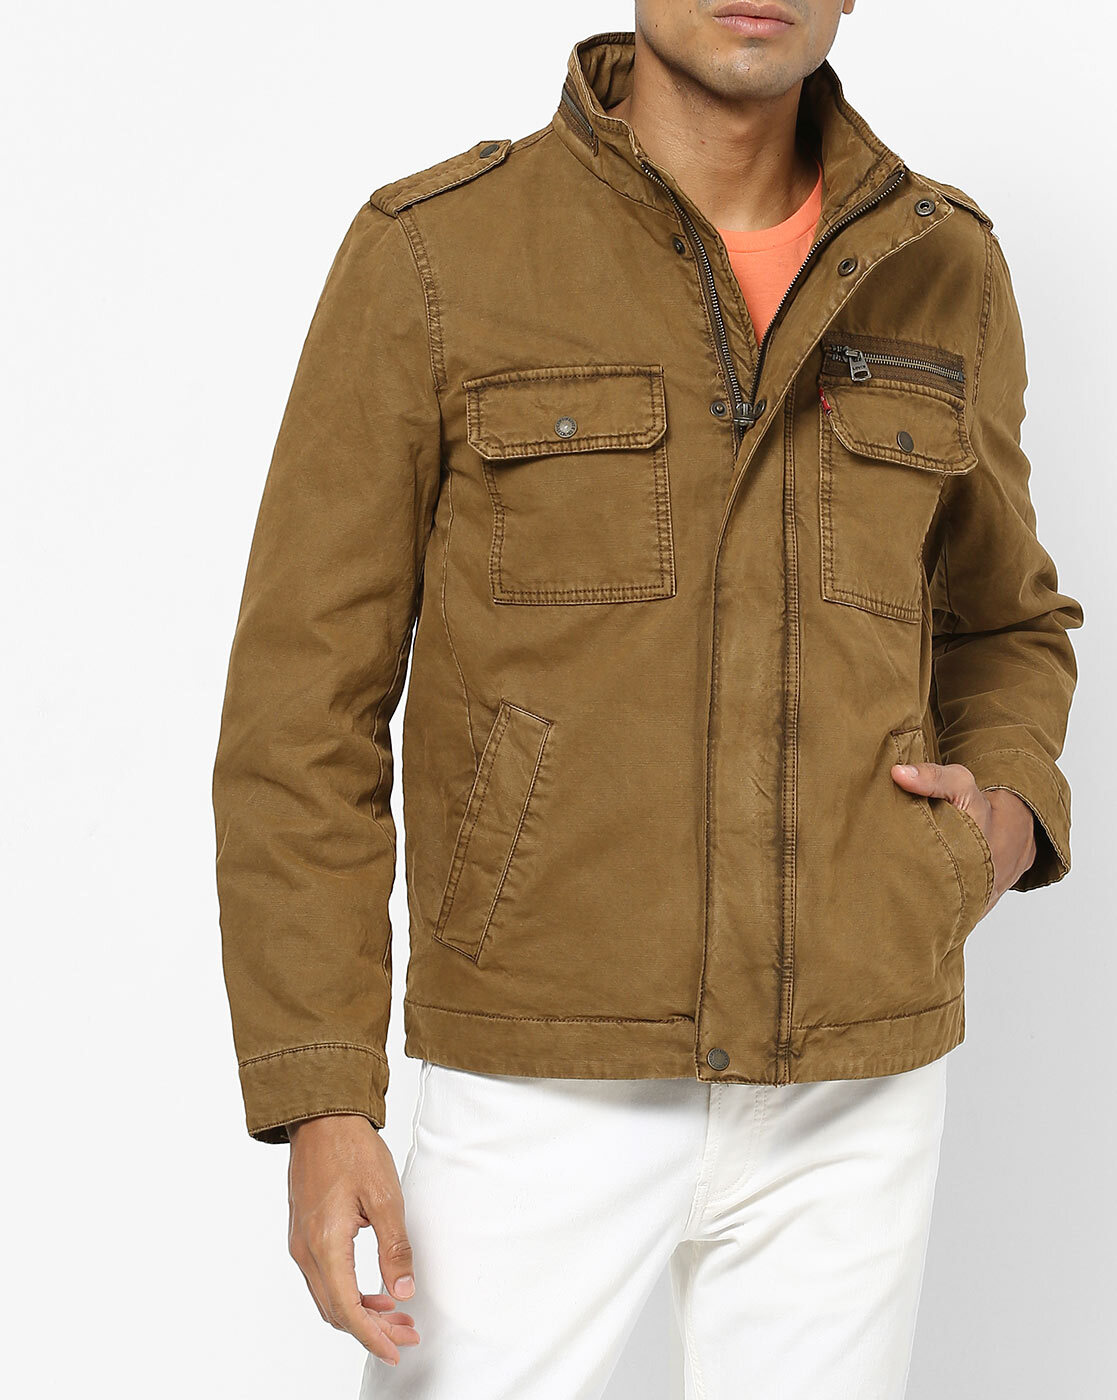 Levi's Men's Washed Cotton Two Pocket Military Jacket (Big & Tall) | eBay